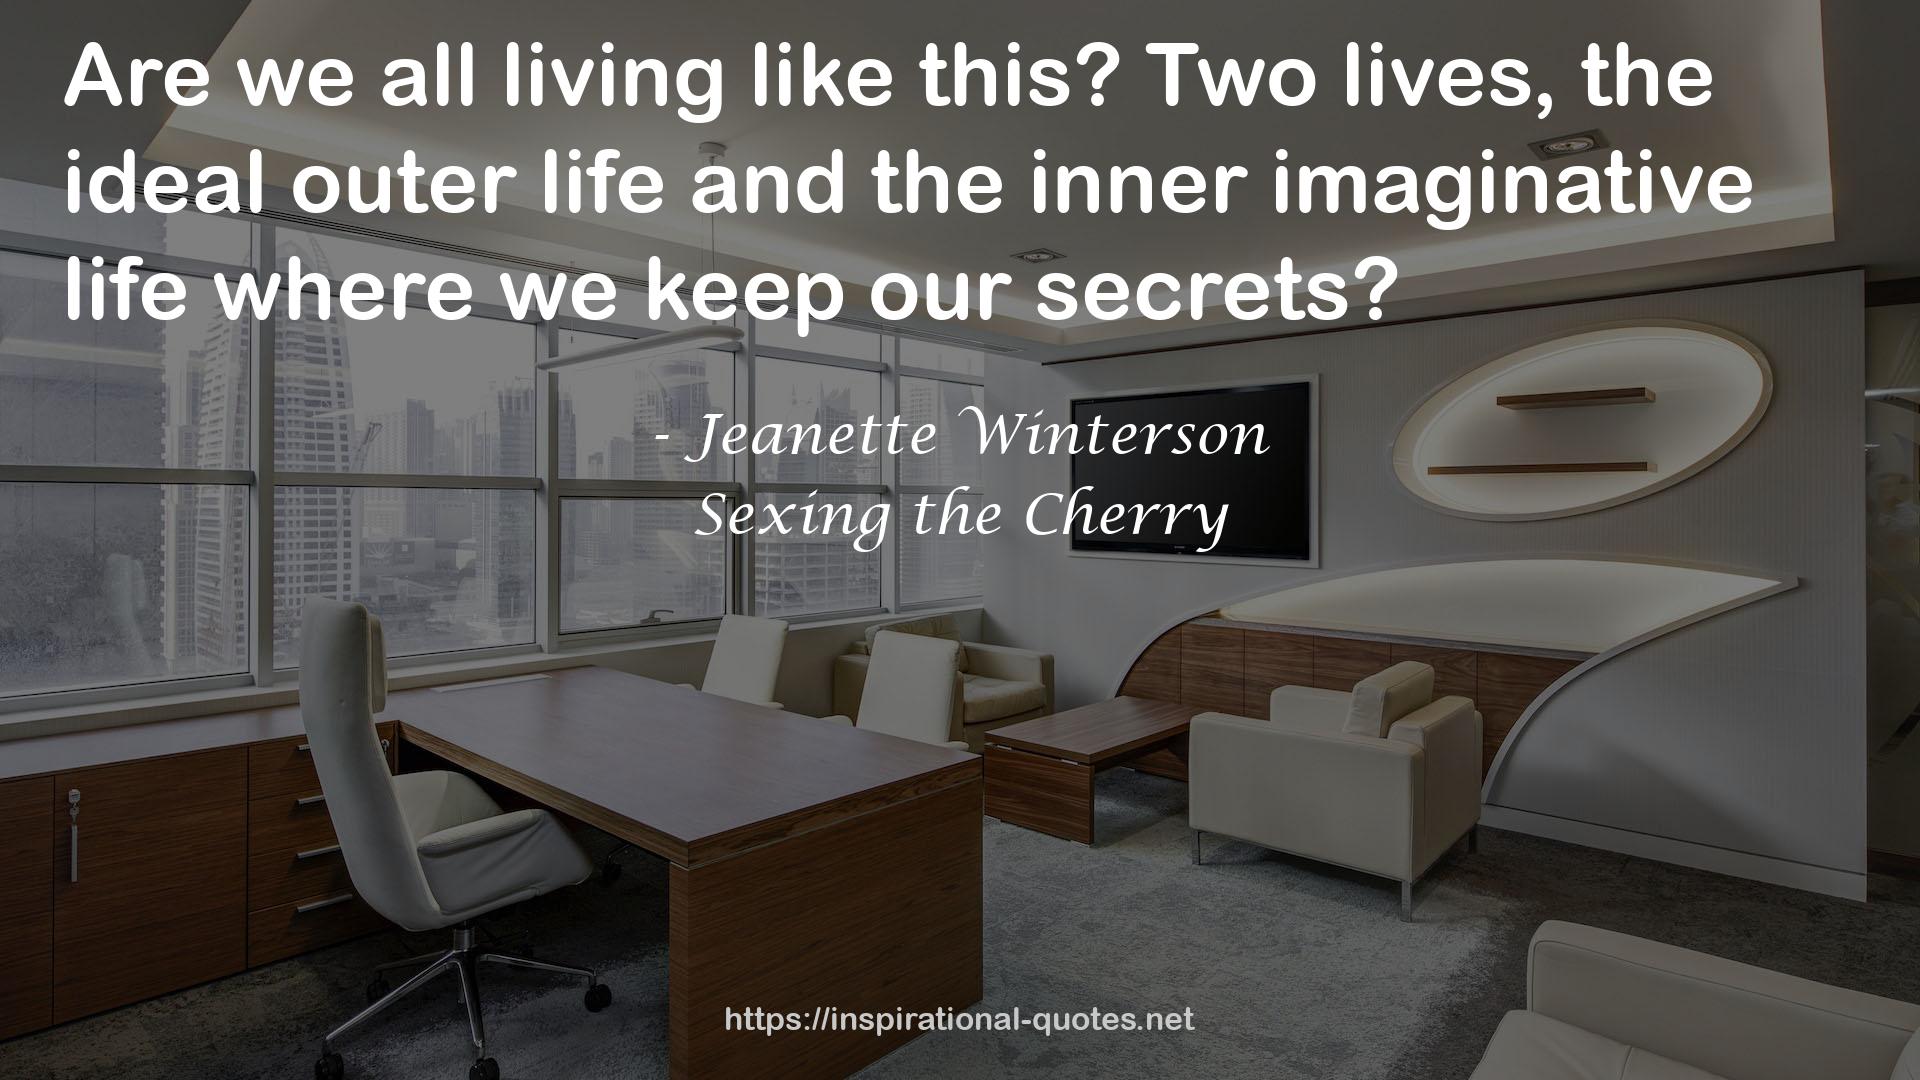 the inner imaginative life  QUOTES